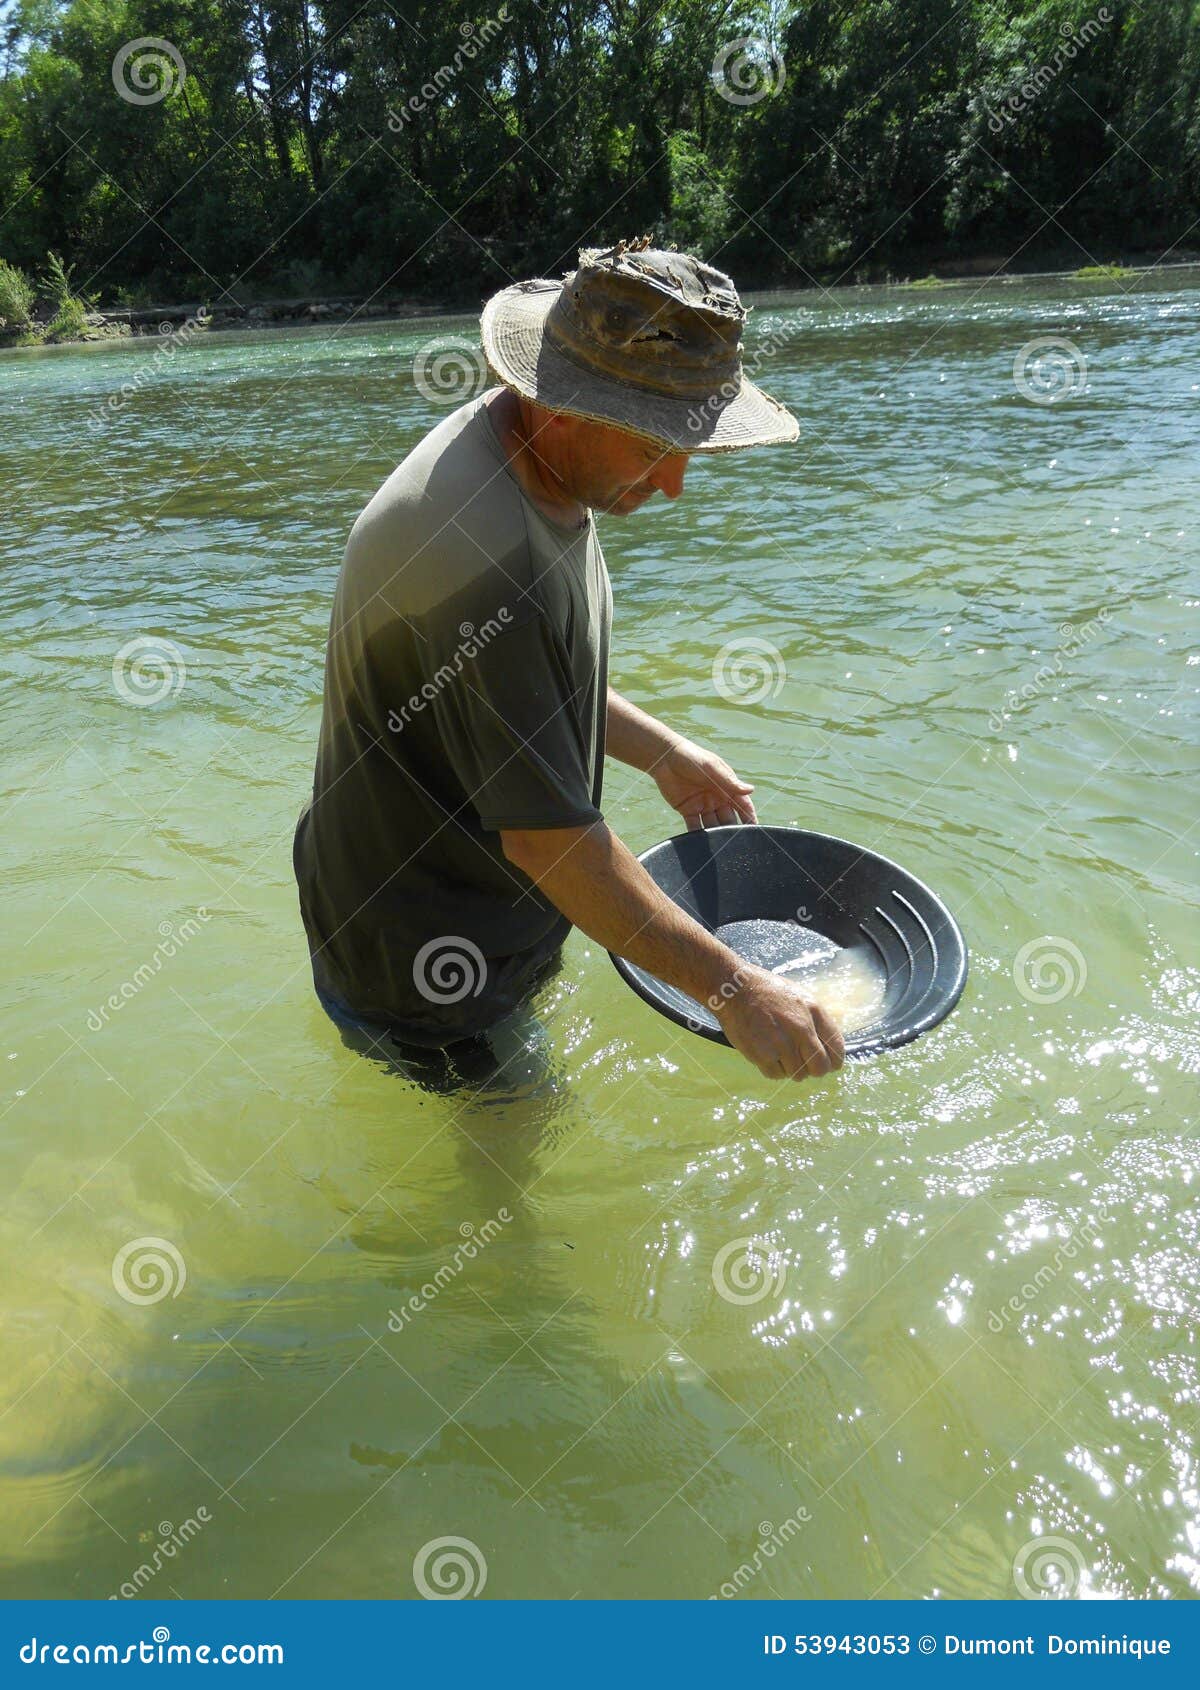 Gold panning editorial stock photo. Image of gold, river - 53943053